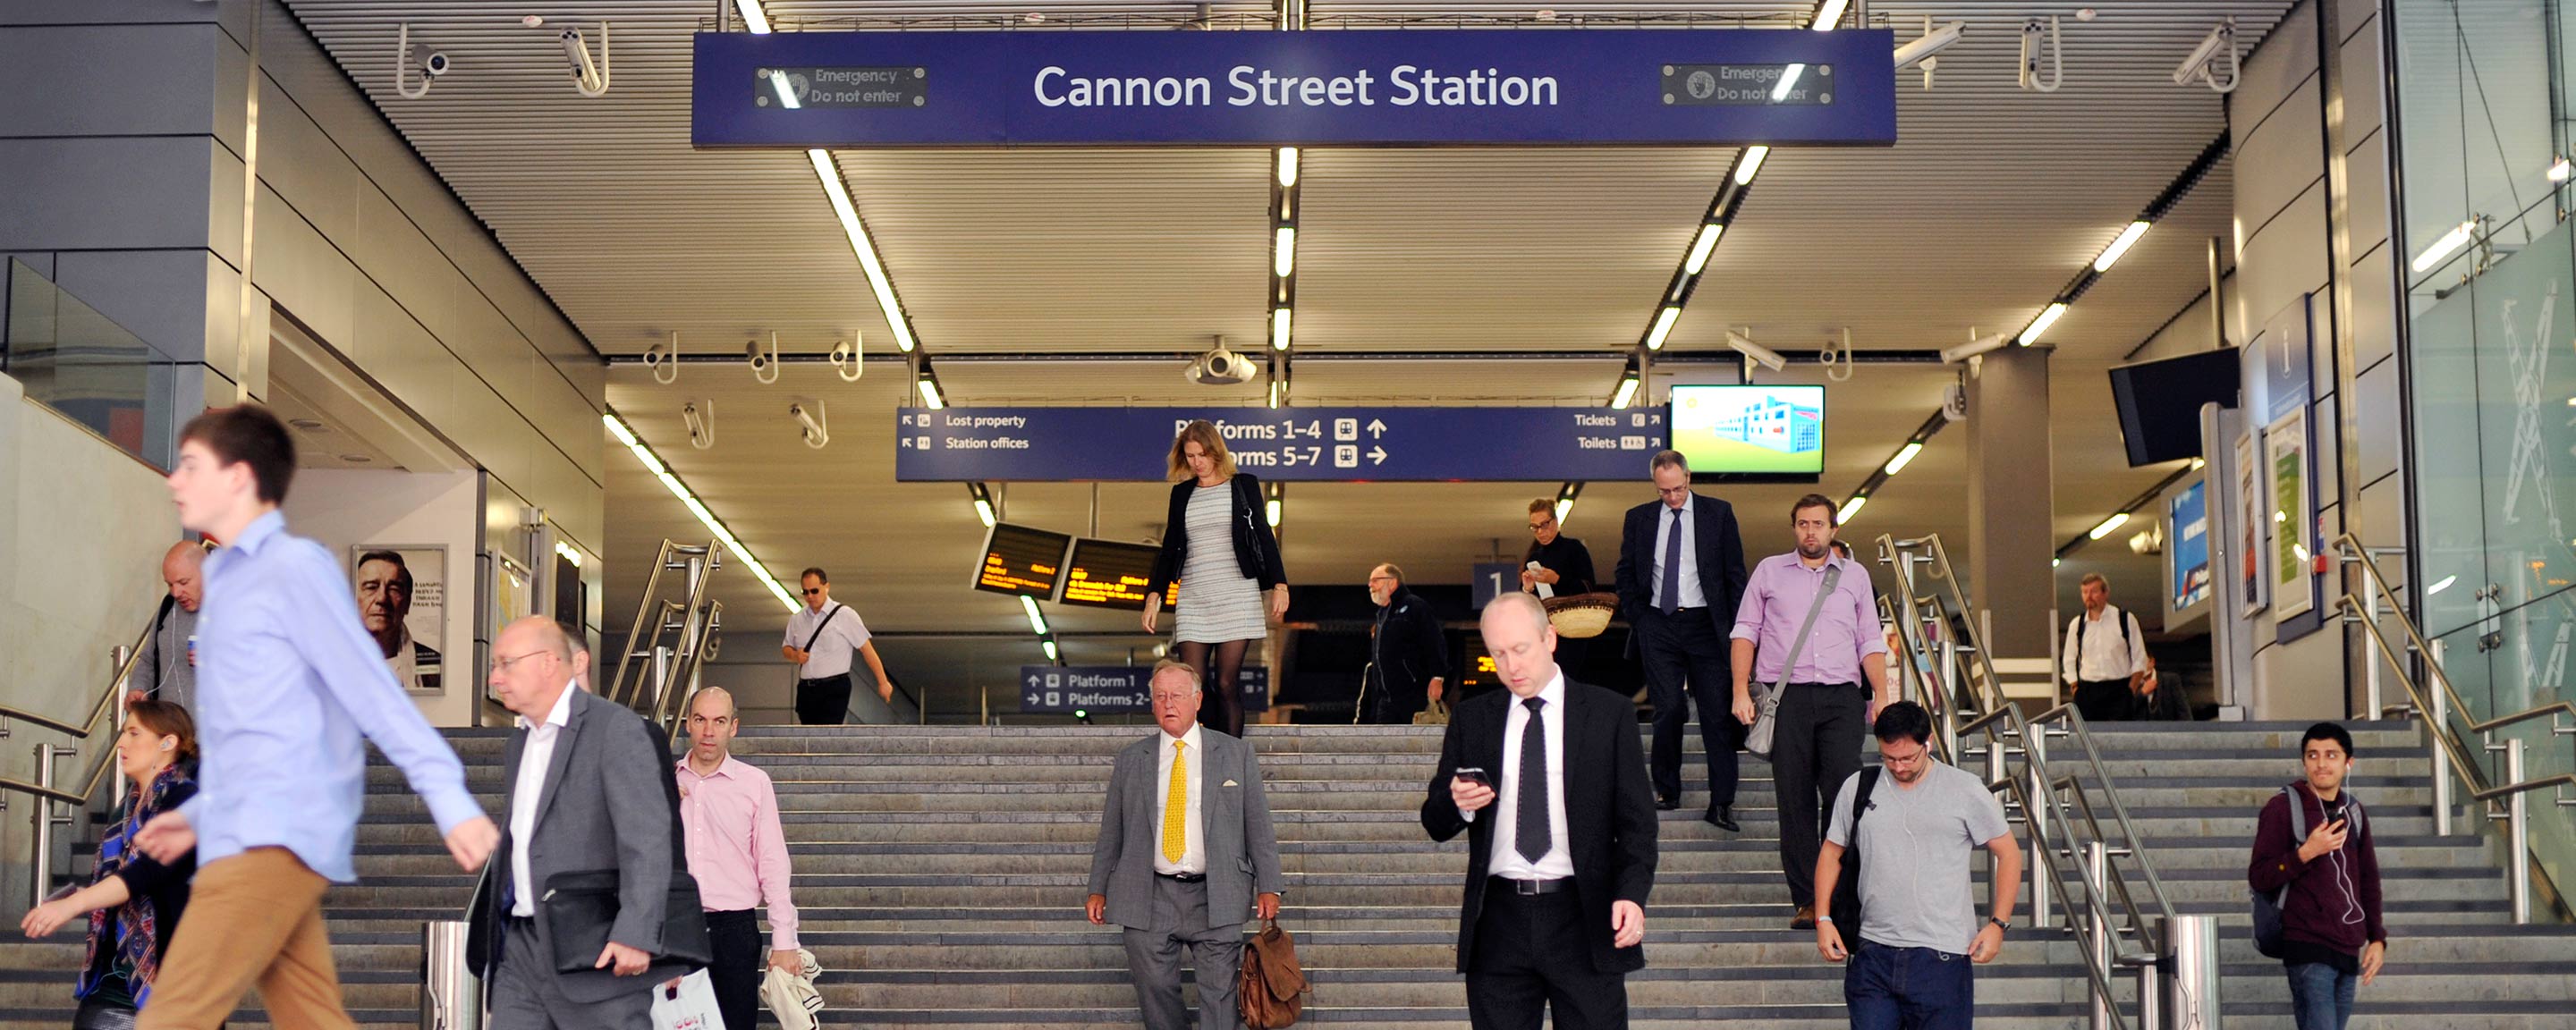 cannon street station departures